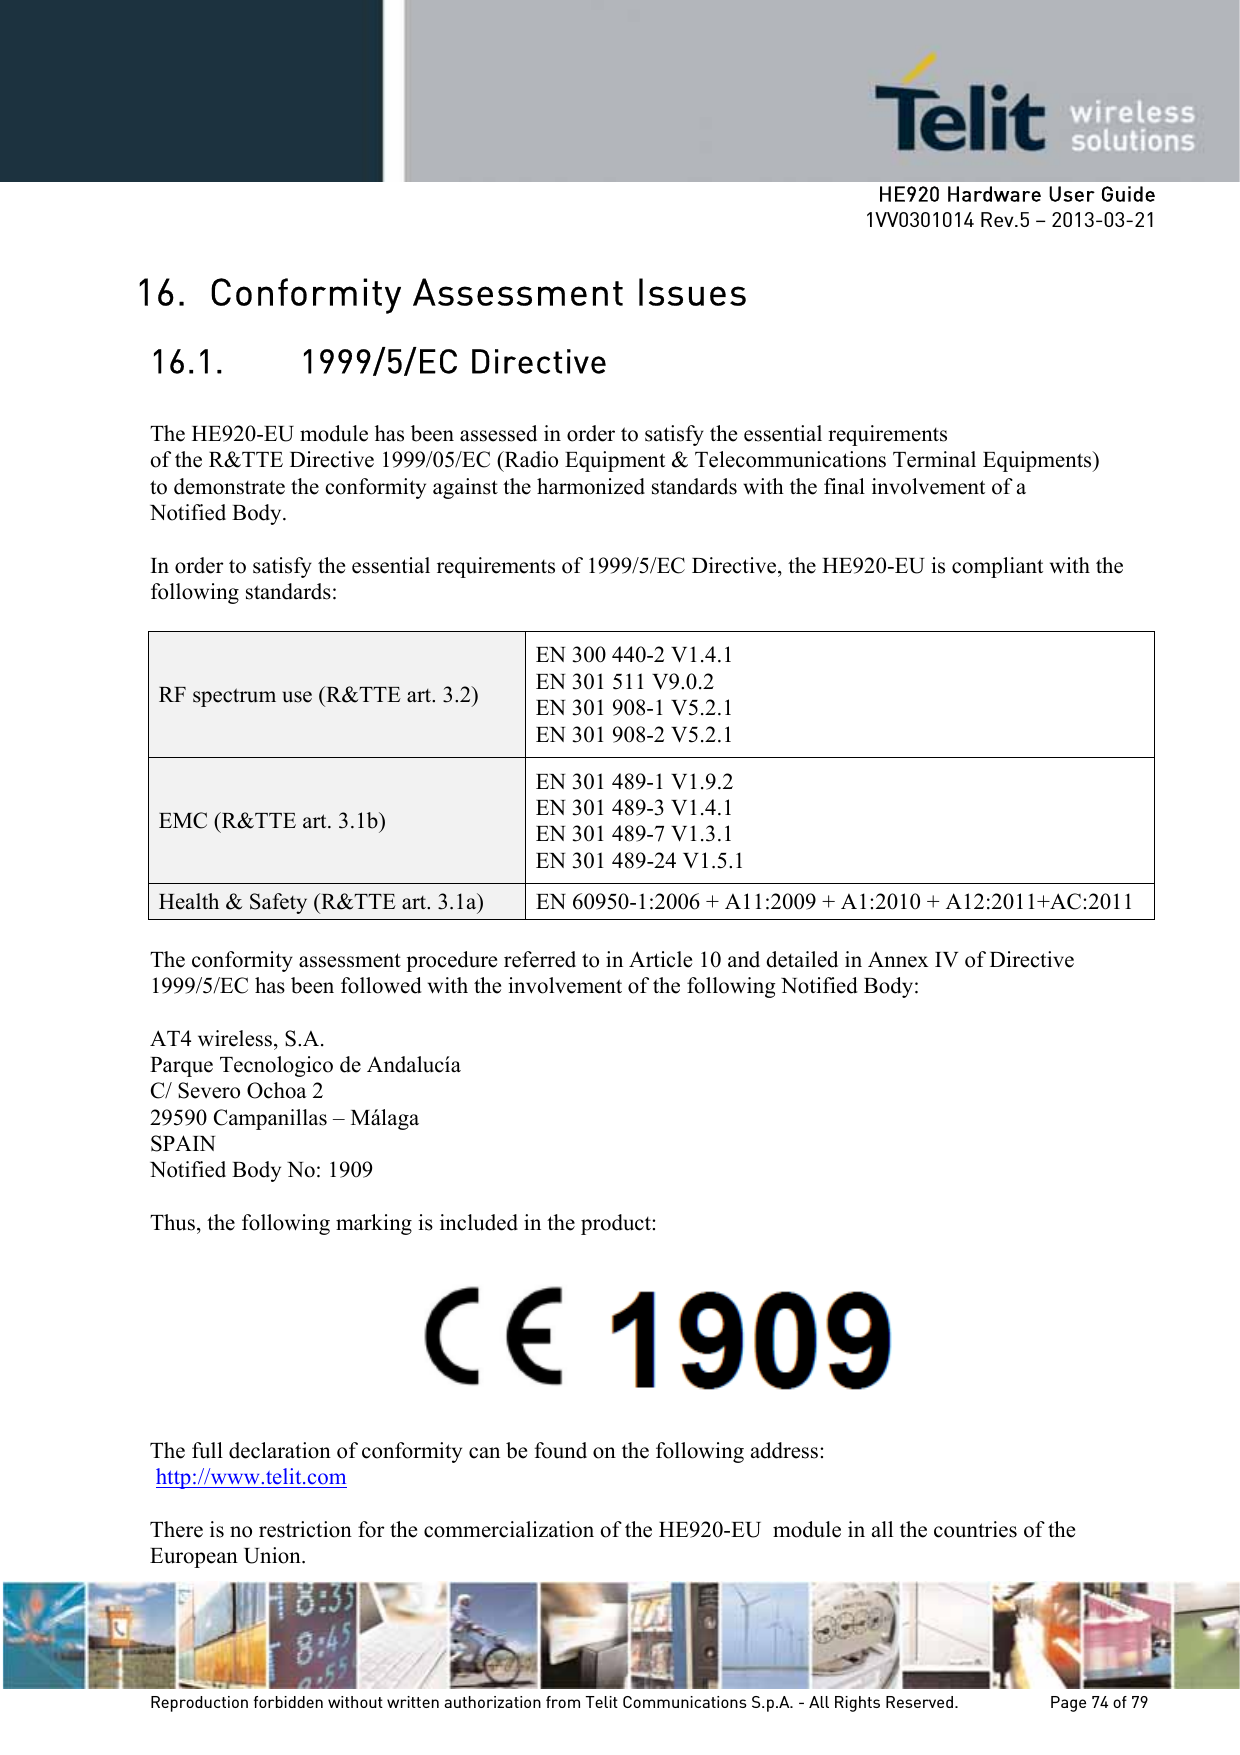     HE920 Hardware User Guide 1VV0301014 Rev.5 – 2013-03-21 Reproduction forbidden without written authorization from Telit Communications S.p.A. - All Rights Reserved.    Page 74 of 79  16. Conformity Assessment Issues 16.1. 1999/5/EC Directive  The HE920-EU module has been assessed in order to satisfy the essential requirements of the R&amp;TTE Directive 1999/05/EC (Radio Equipment &amp; Telecommunications Terminal Equipments) to demonstrate the conformity against the harmonized standards with the final involvement of a Notified Body.  In order to satisfy the essential requirements of 1999/5/EC Directive, the HE920-EU is compliant with the following standards:  RF spectrum use (R&amp;TTE art. 3.2) EN 300 440-2 V1.4.1 EN 301 511 V9.0.2 EN 301 908-1 V5.2.1 EN 301 908-2 V5.2.1 EMC (R&amp;TTE art. 3.1b) EN 301 489-1 V1.9.2 EN 301 489-3 V1.4.1  EN 301 489-7 V1.3.1 EN 301 489-24 V1.5.1 Health &amp; Safety (R&amp;TTE art. 3.1a)  EN 60950-1:2006 + A11:2009 + A1:2010 + A12:2011+AC:2011  The conformity assessment procedure referred to in Article 10 and detailed in Annex IV of Directive 1999/5/EC has been followed with the involvement of the following Notified Body:   AT4 wireless, S.A. Parque Tecnologico de Andalucía C/ Severo Ochoa 2 29590 Campanillas – Málaga SPAIN Notified Body No: 1909  Thus, the following marking is included in the product:    The full declaration of conformity can be found on the following address:  http://www.telit.com  There is no restriction for the commercialization of the HE920-EU  module in all the countries of the European Union. 